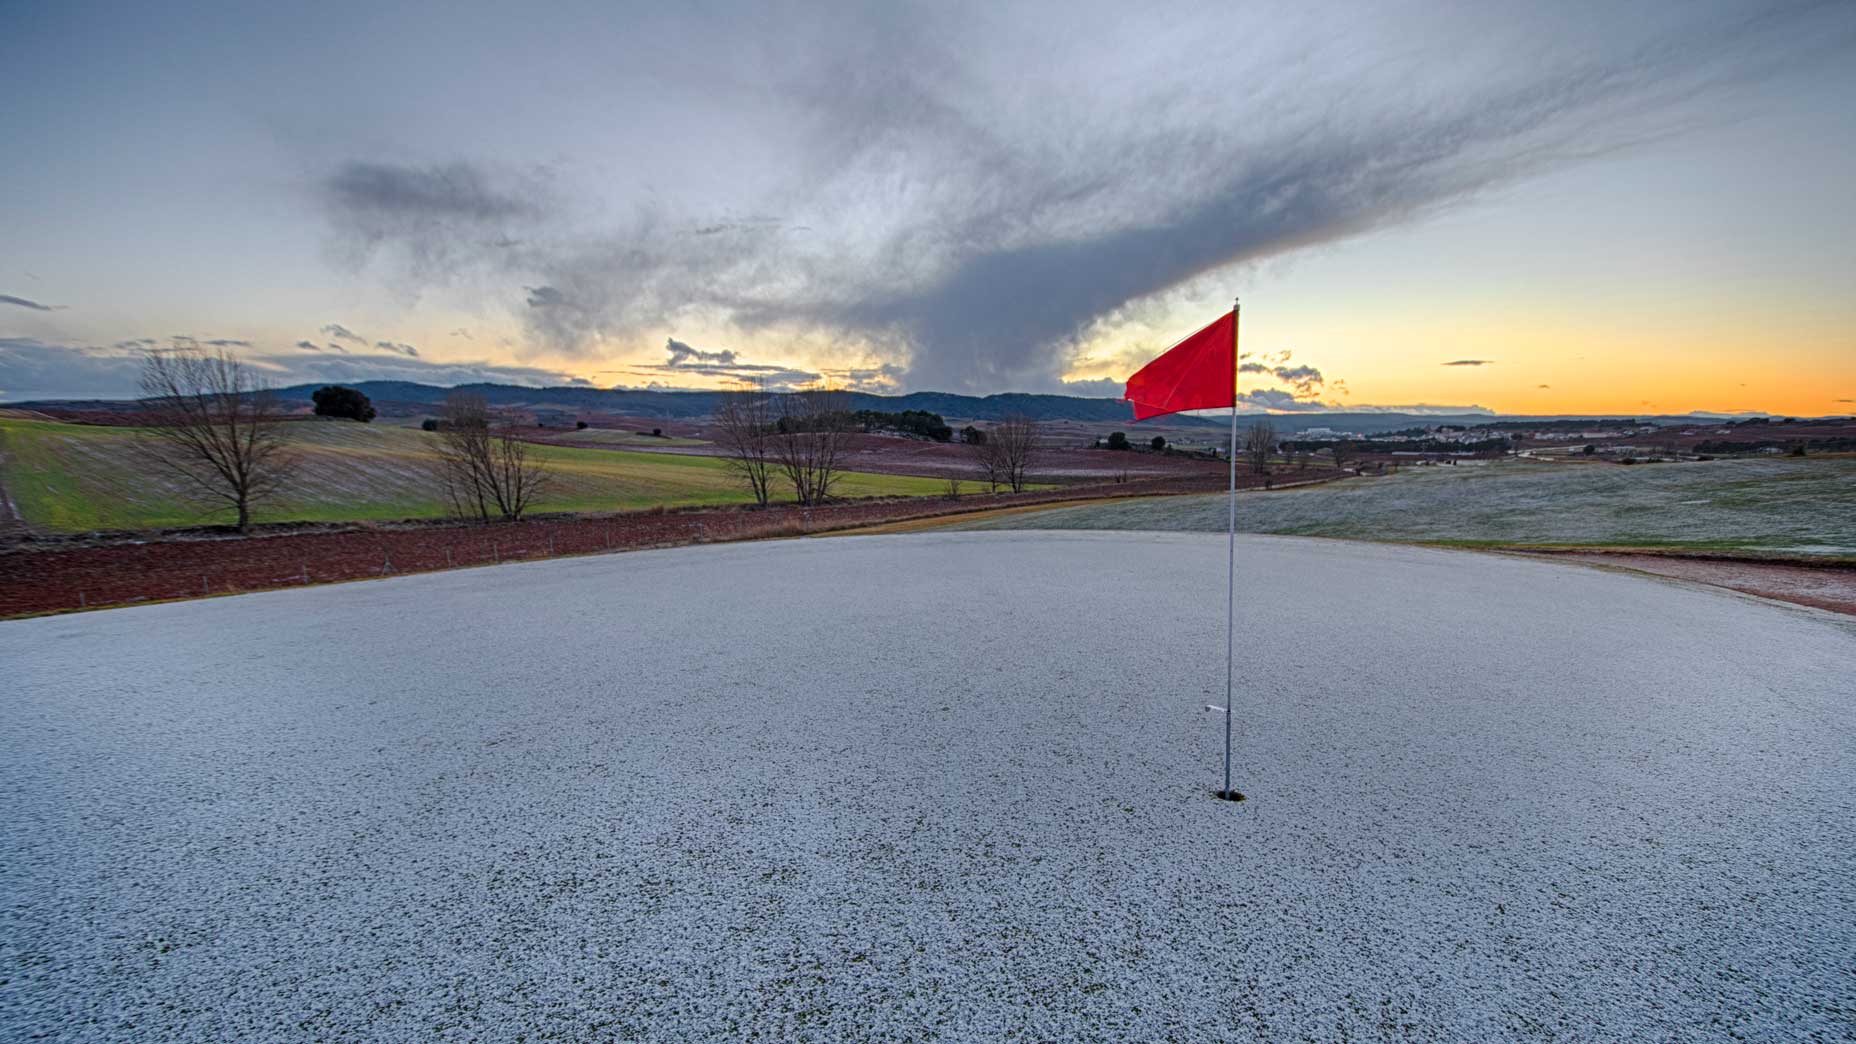 wrijving creatief stormloop How to play golf in the cold: 8 tips for conquering winter golf